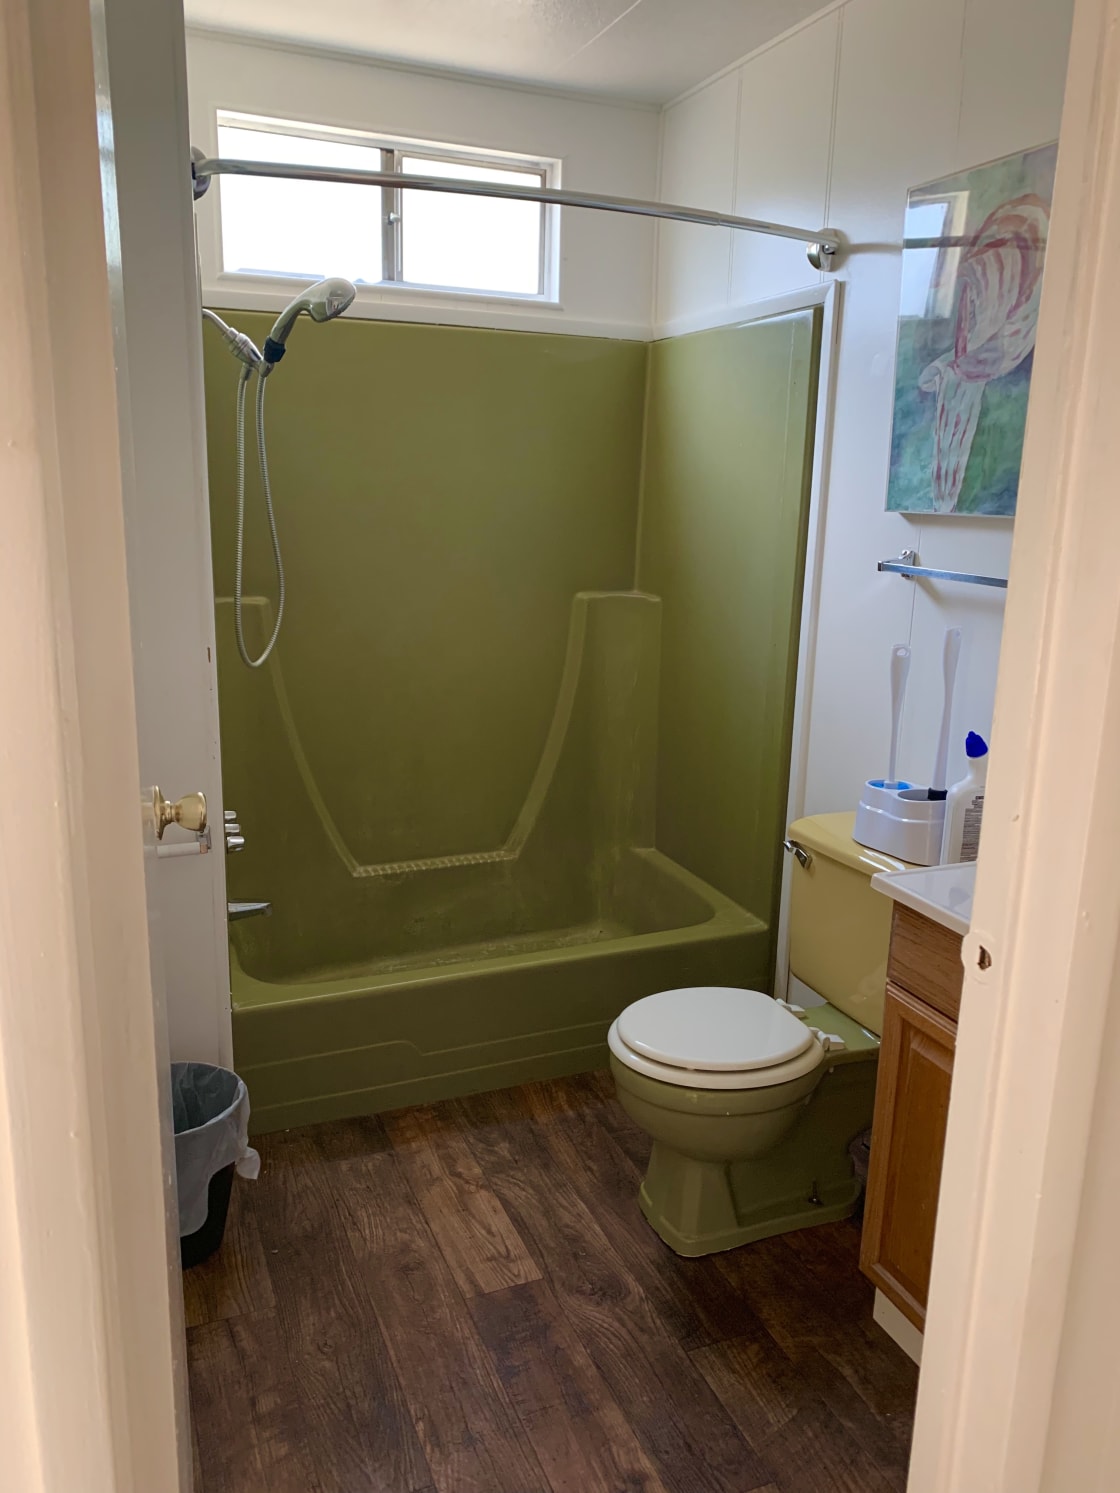 This is a shared bathroom, which is great for glancing!